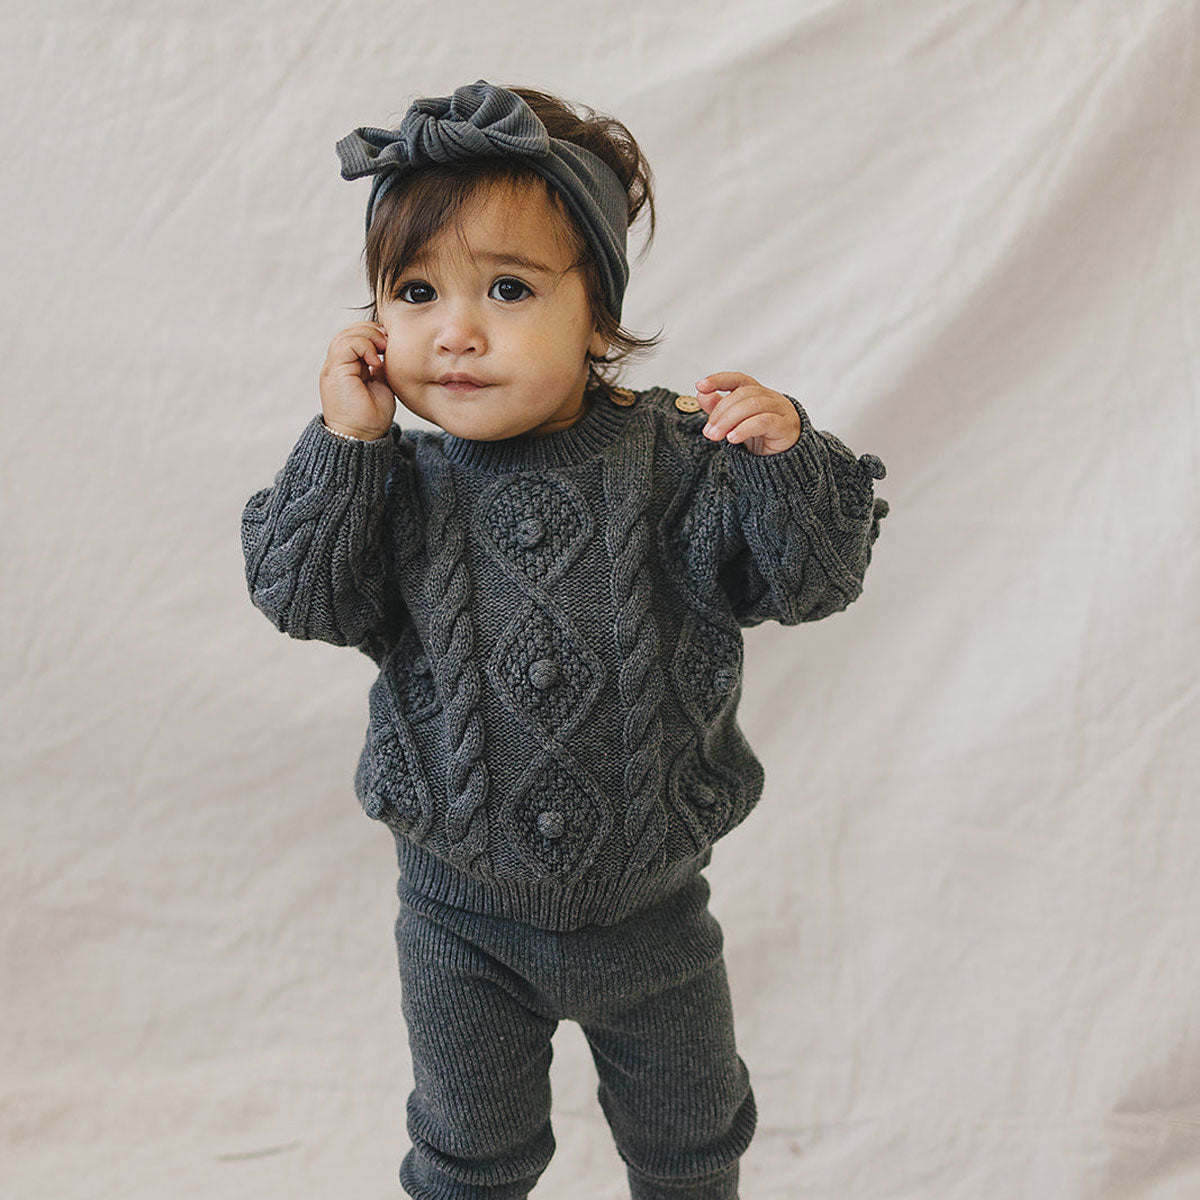 Mebie Baby Cable Knit Sweater - Charcoal